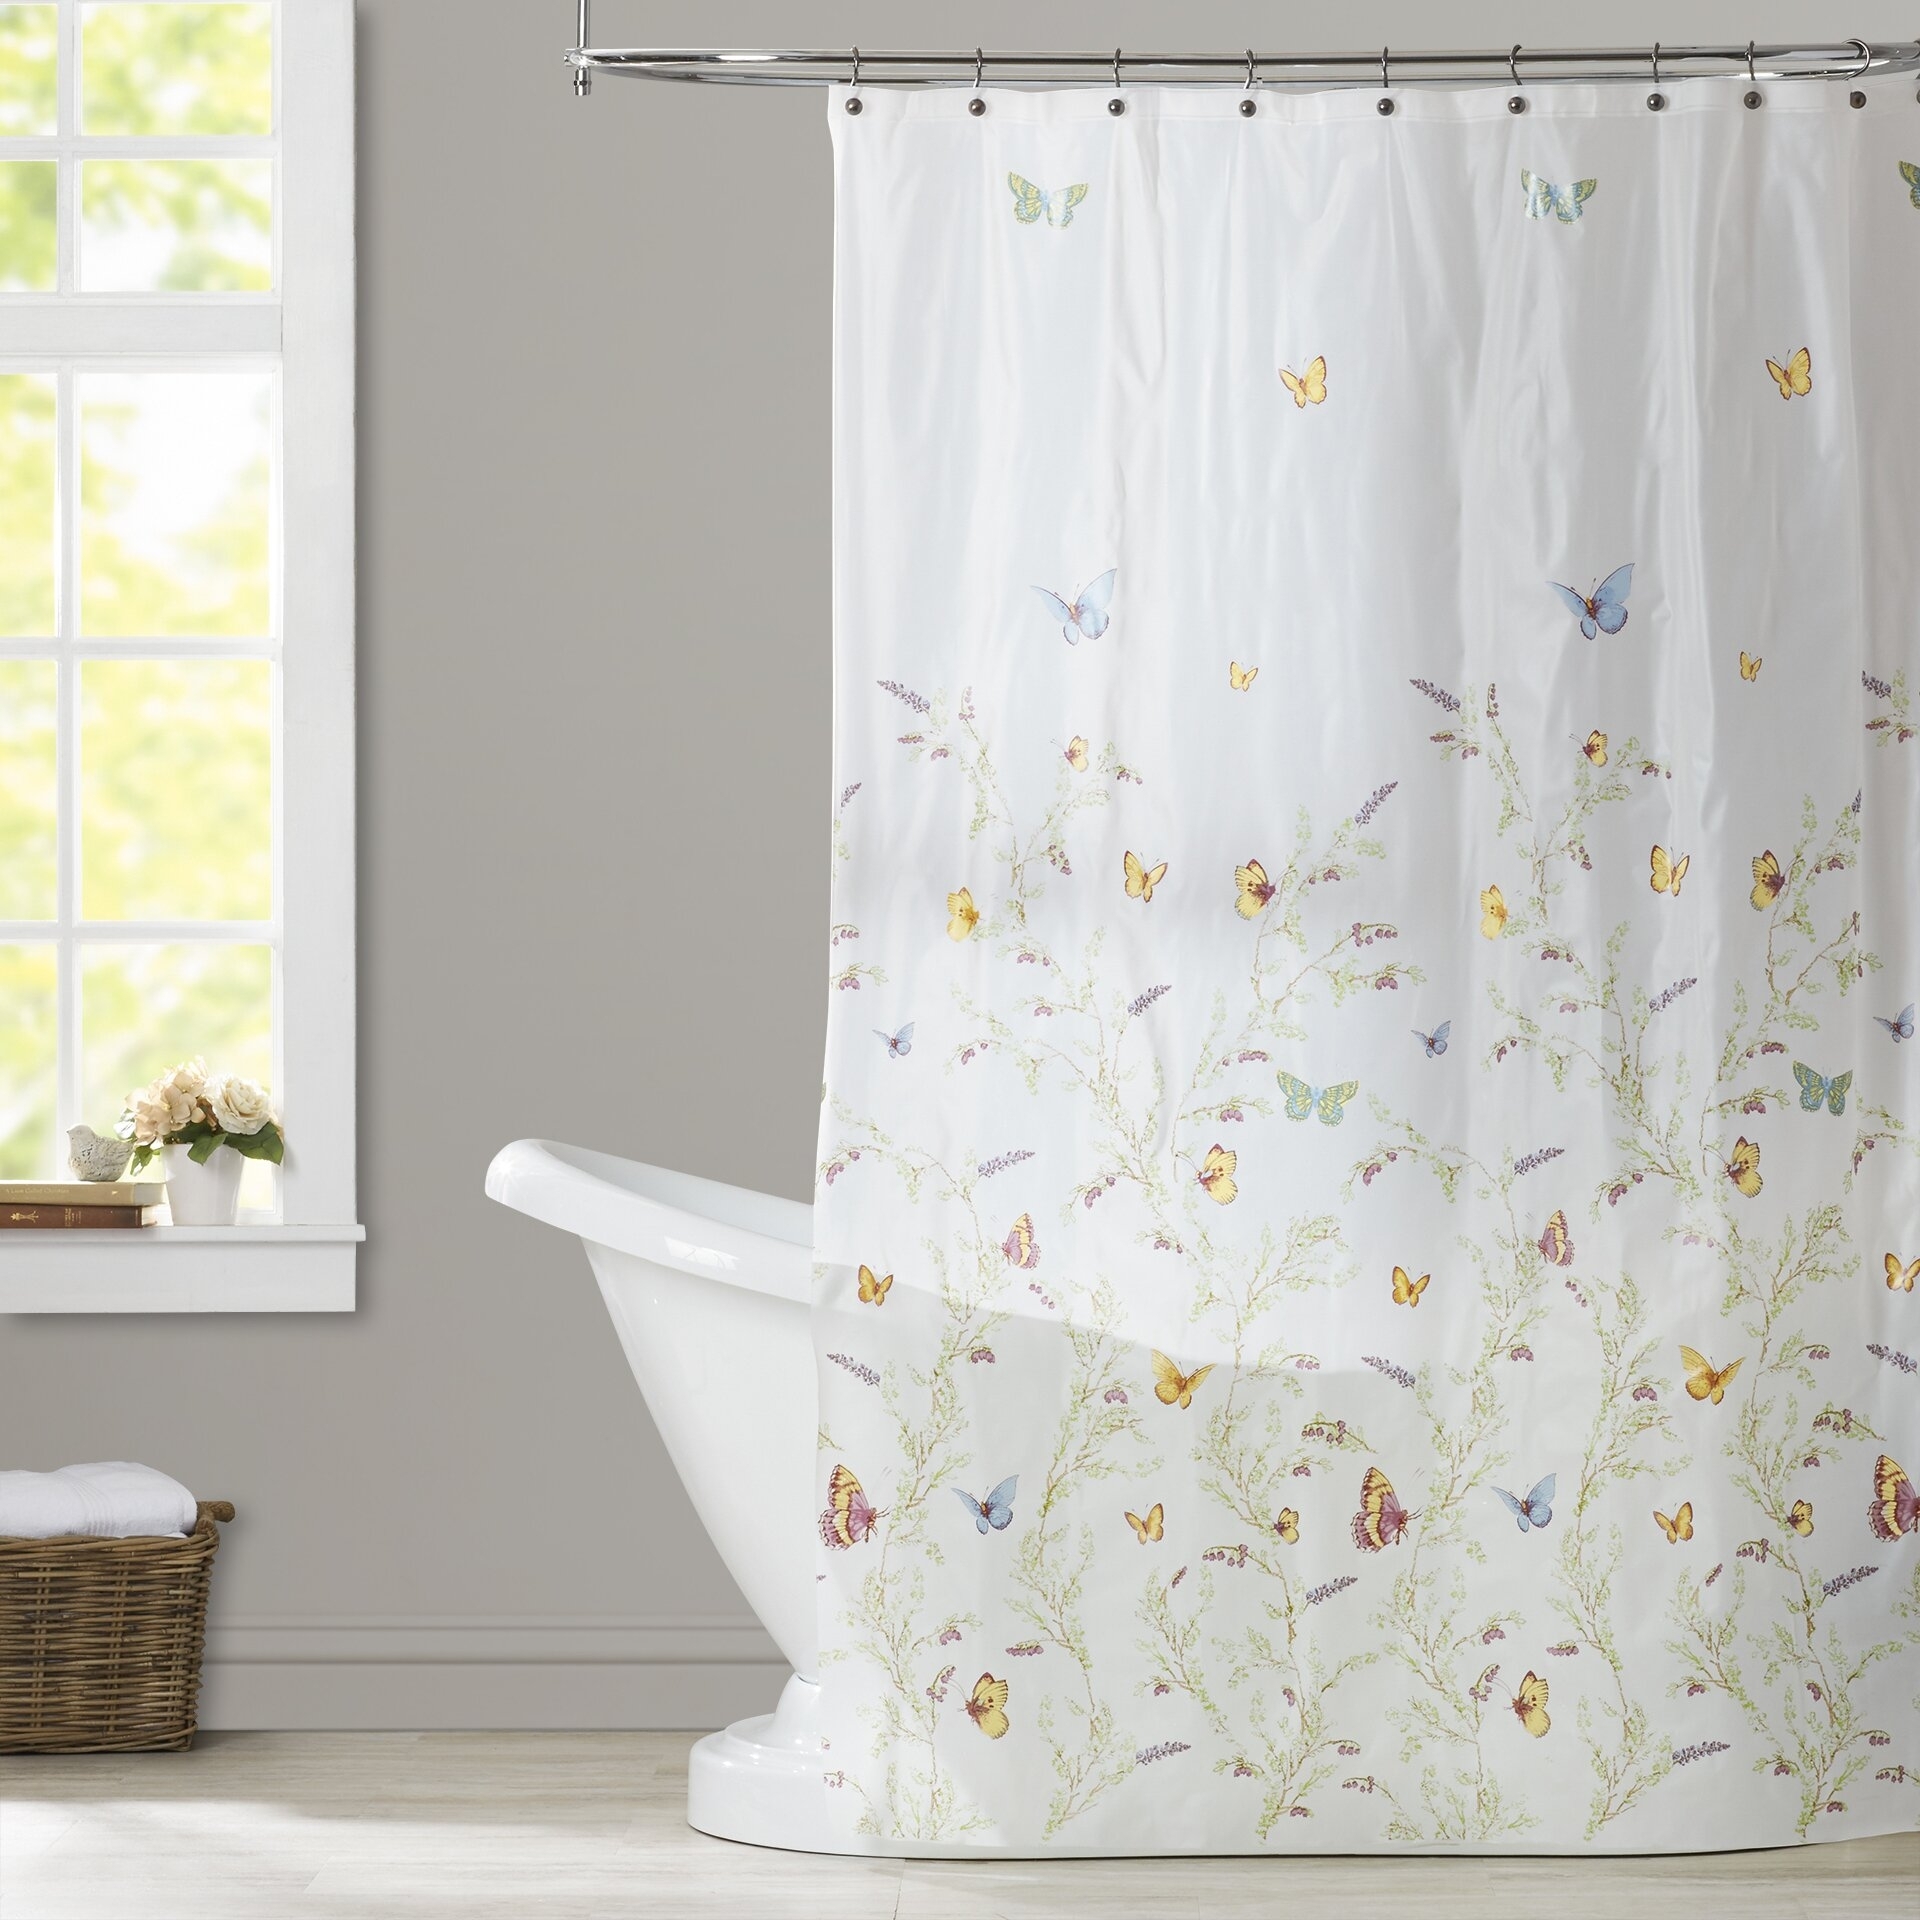 https://visualhunt.com/photos/title/5-expert-tips-to-choose-a-shower-curtain.jpg